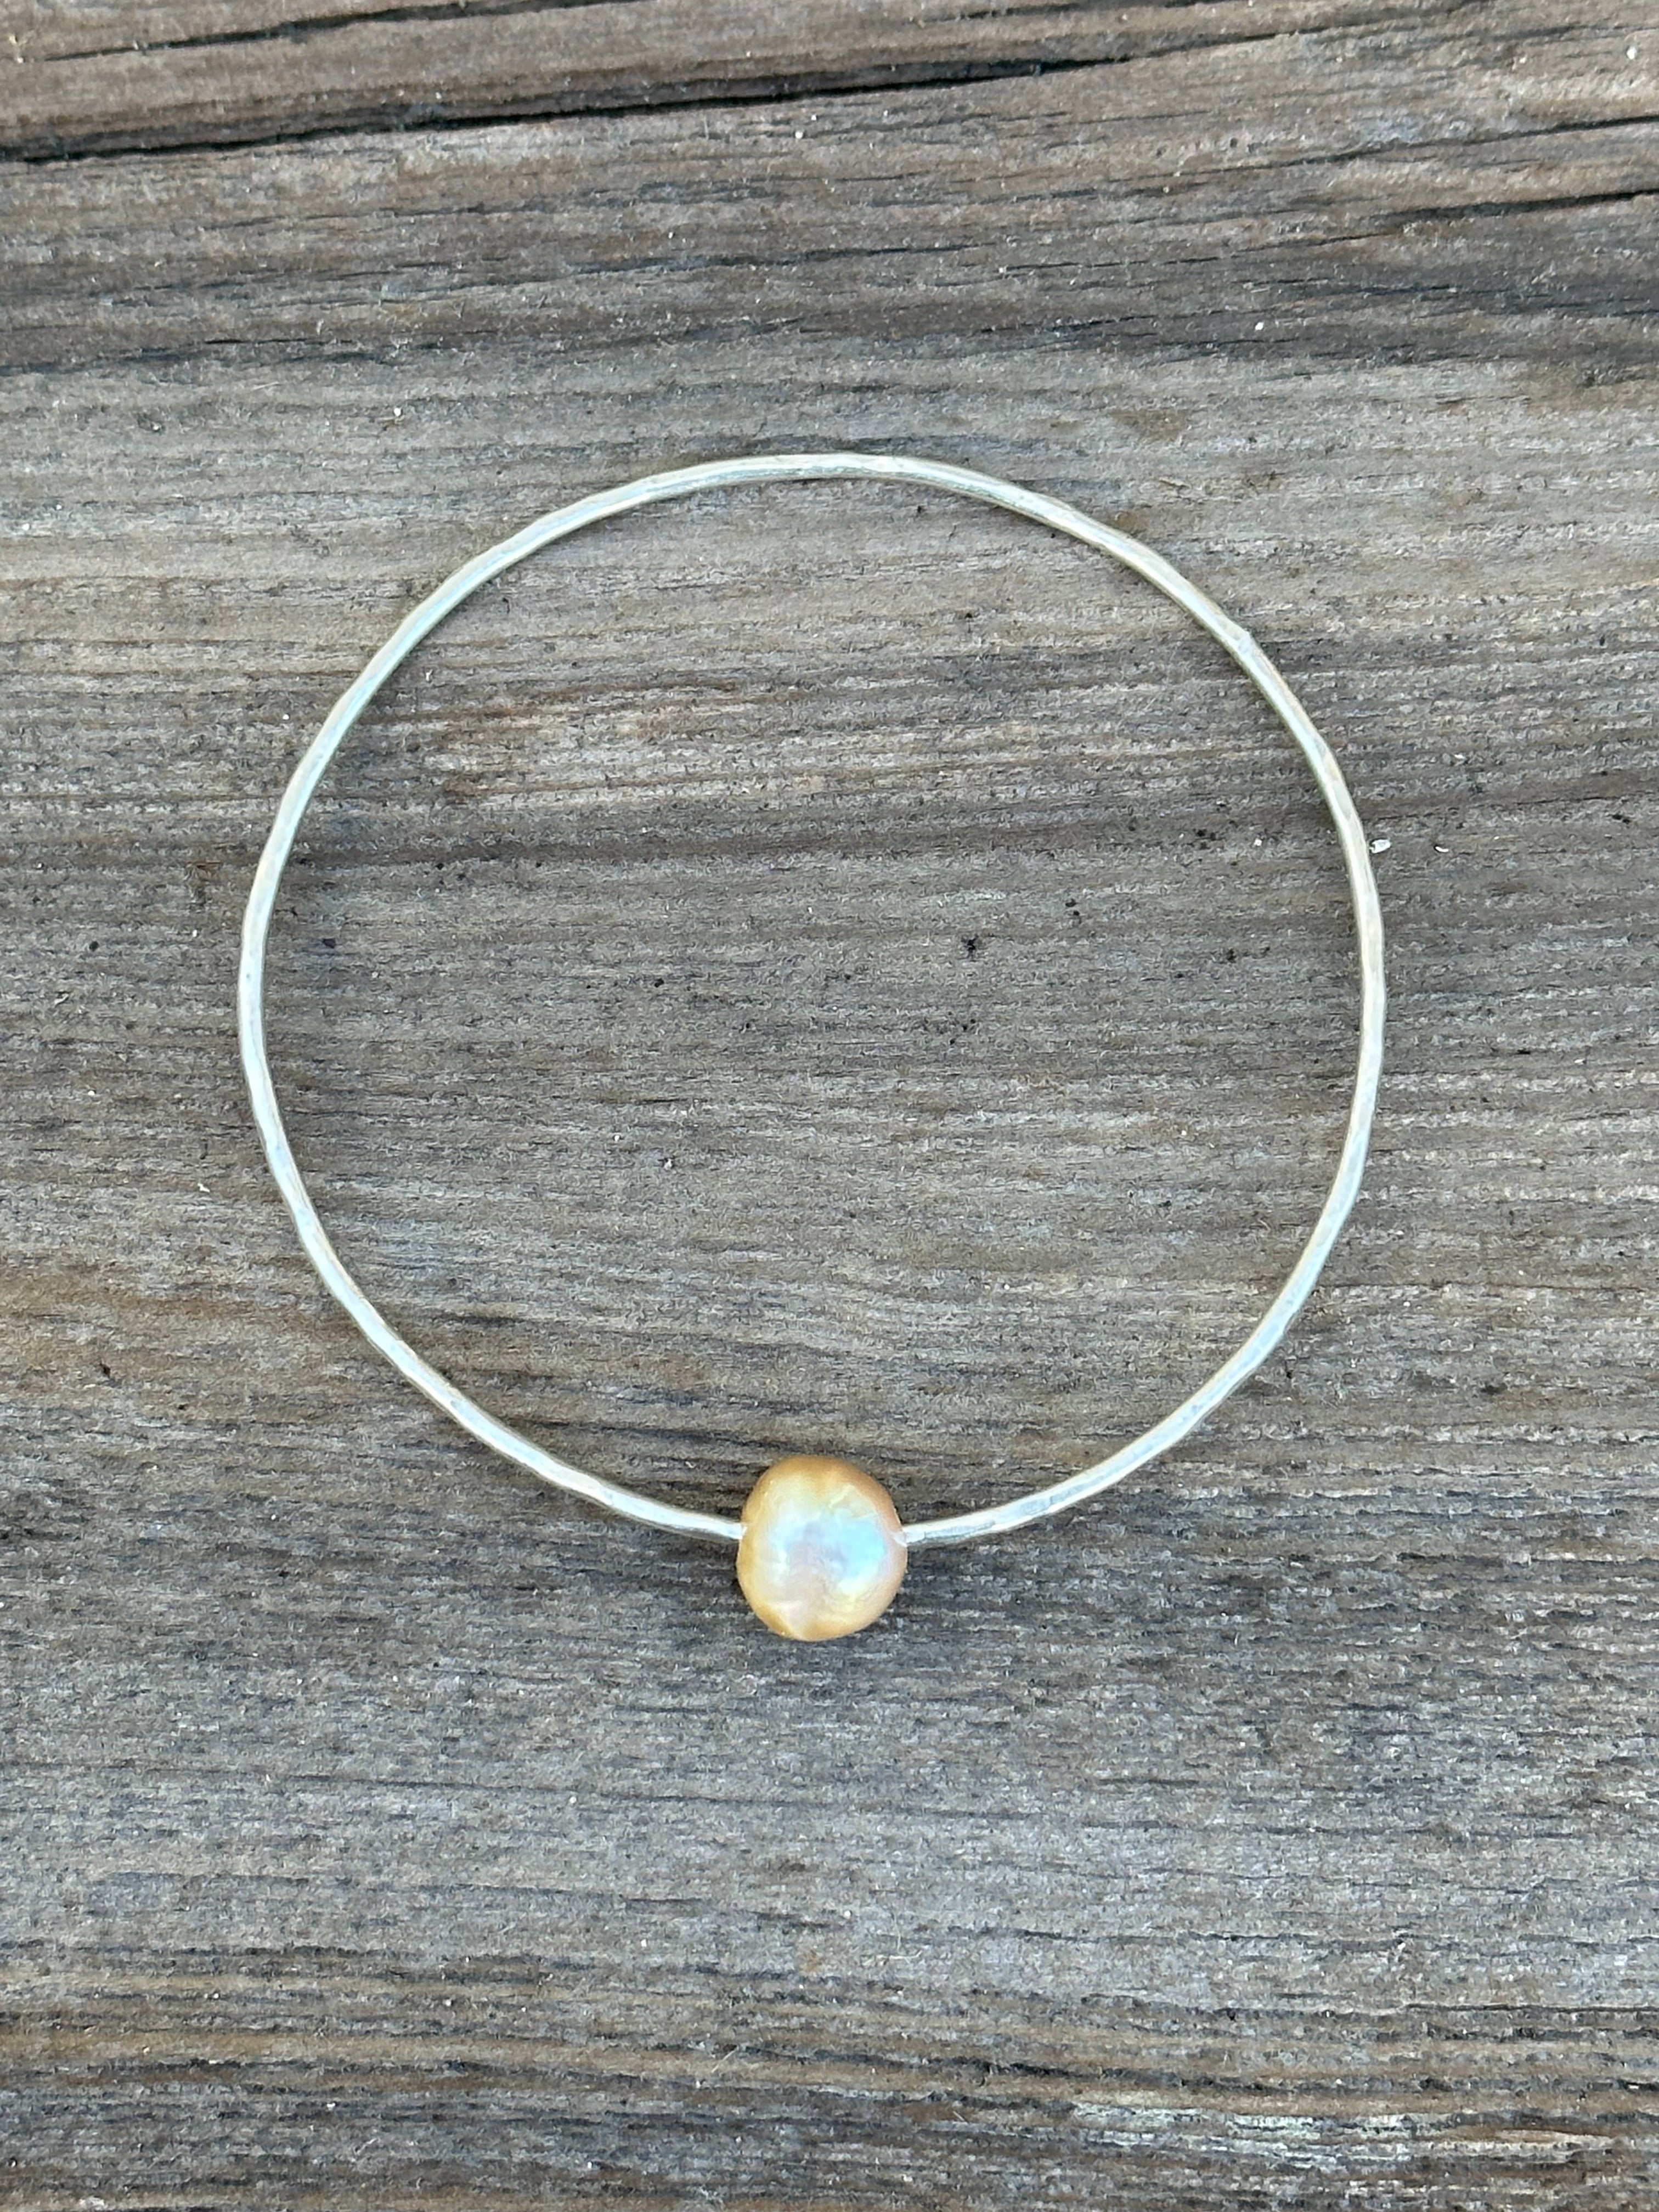 A single silver hammered bangle with a golden pearl on a wooden background.